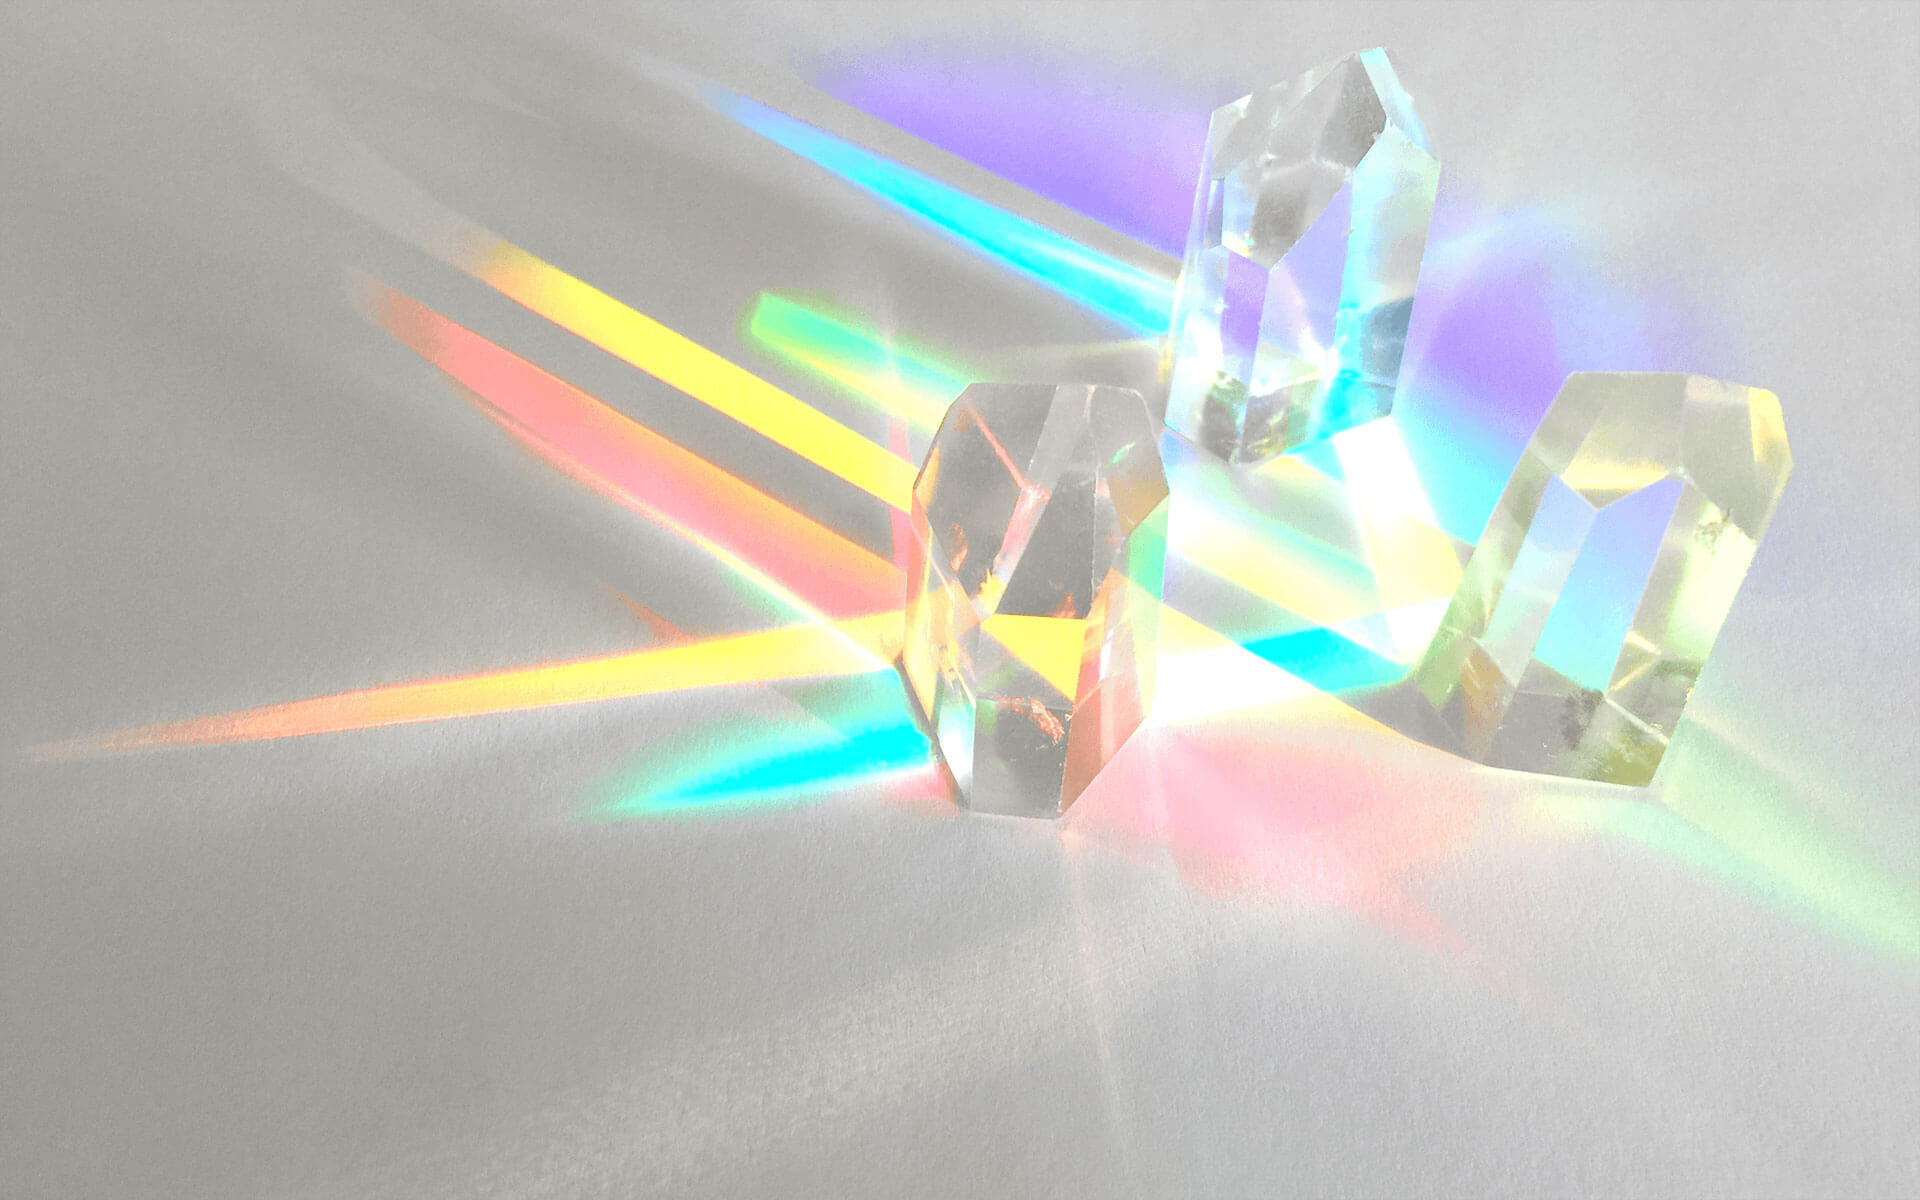 Crystals acting as light prisms